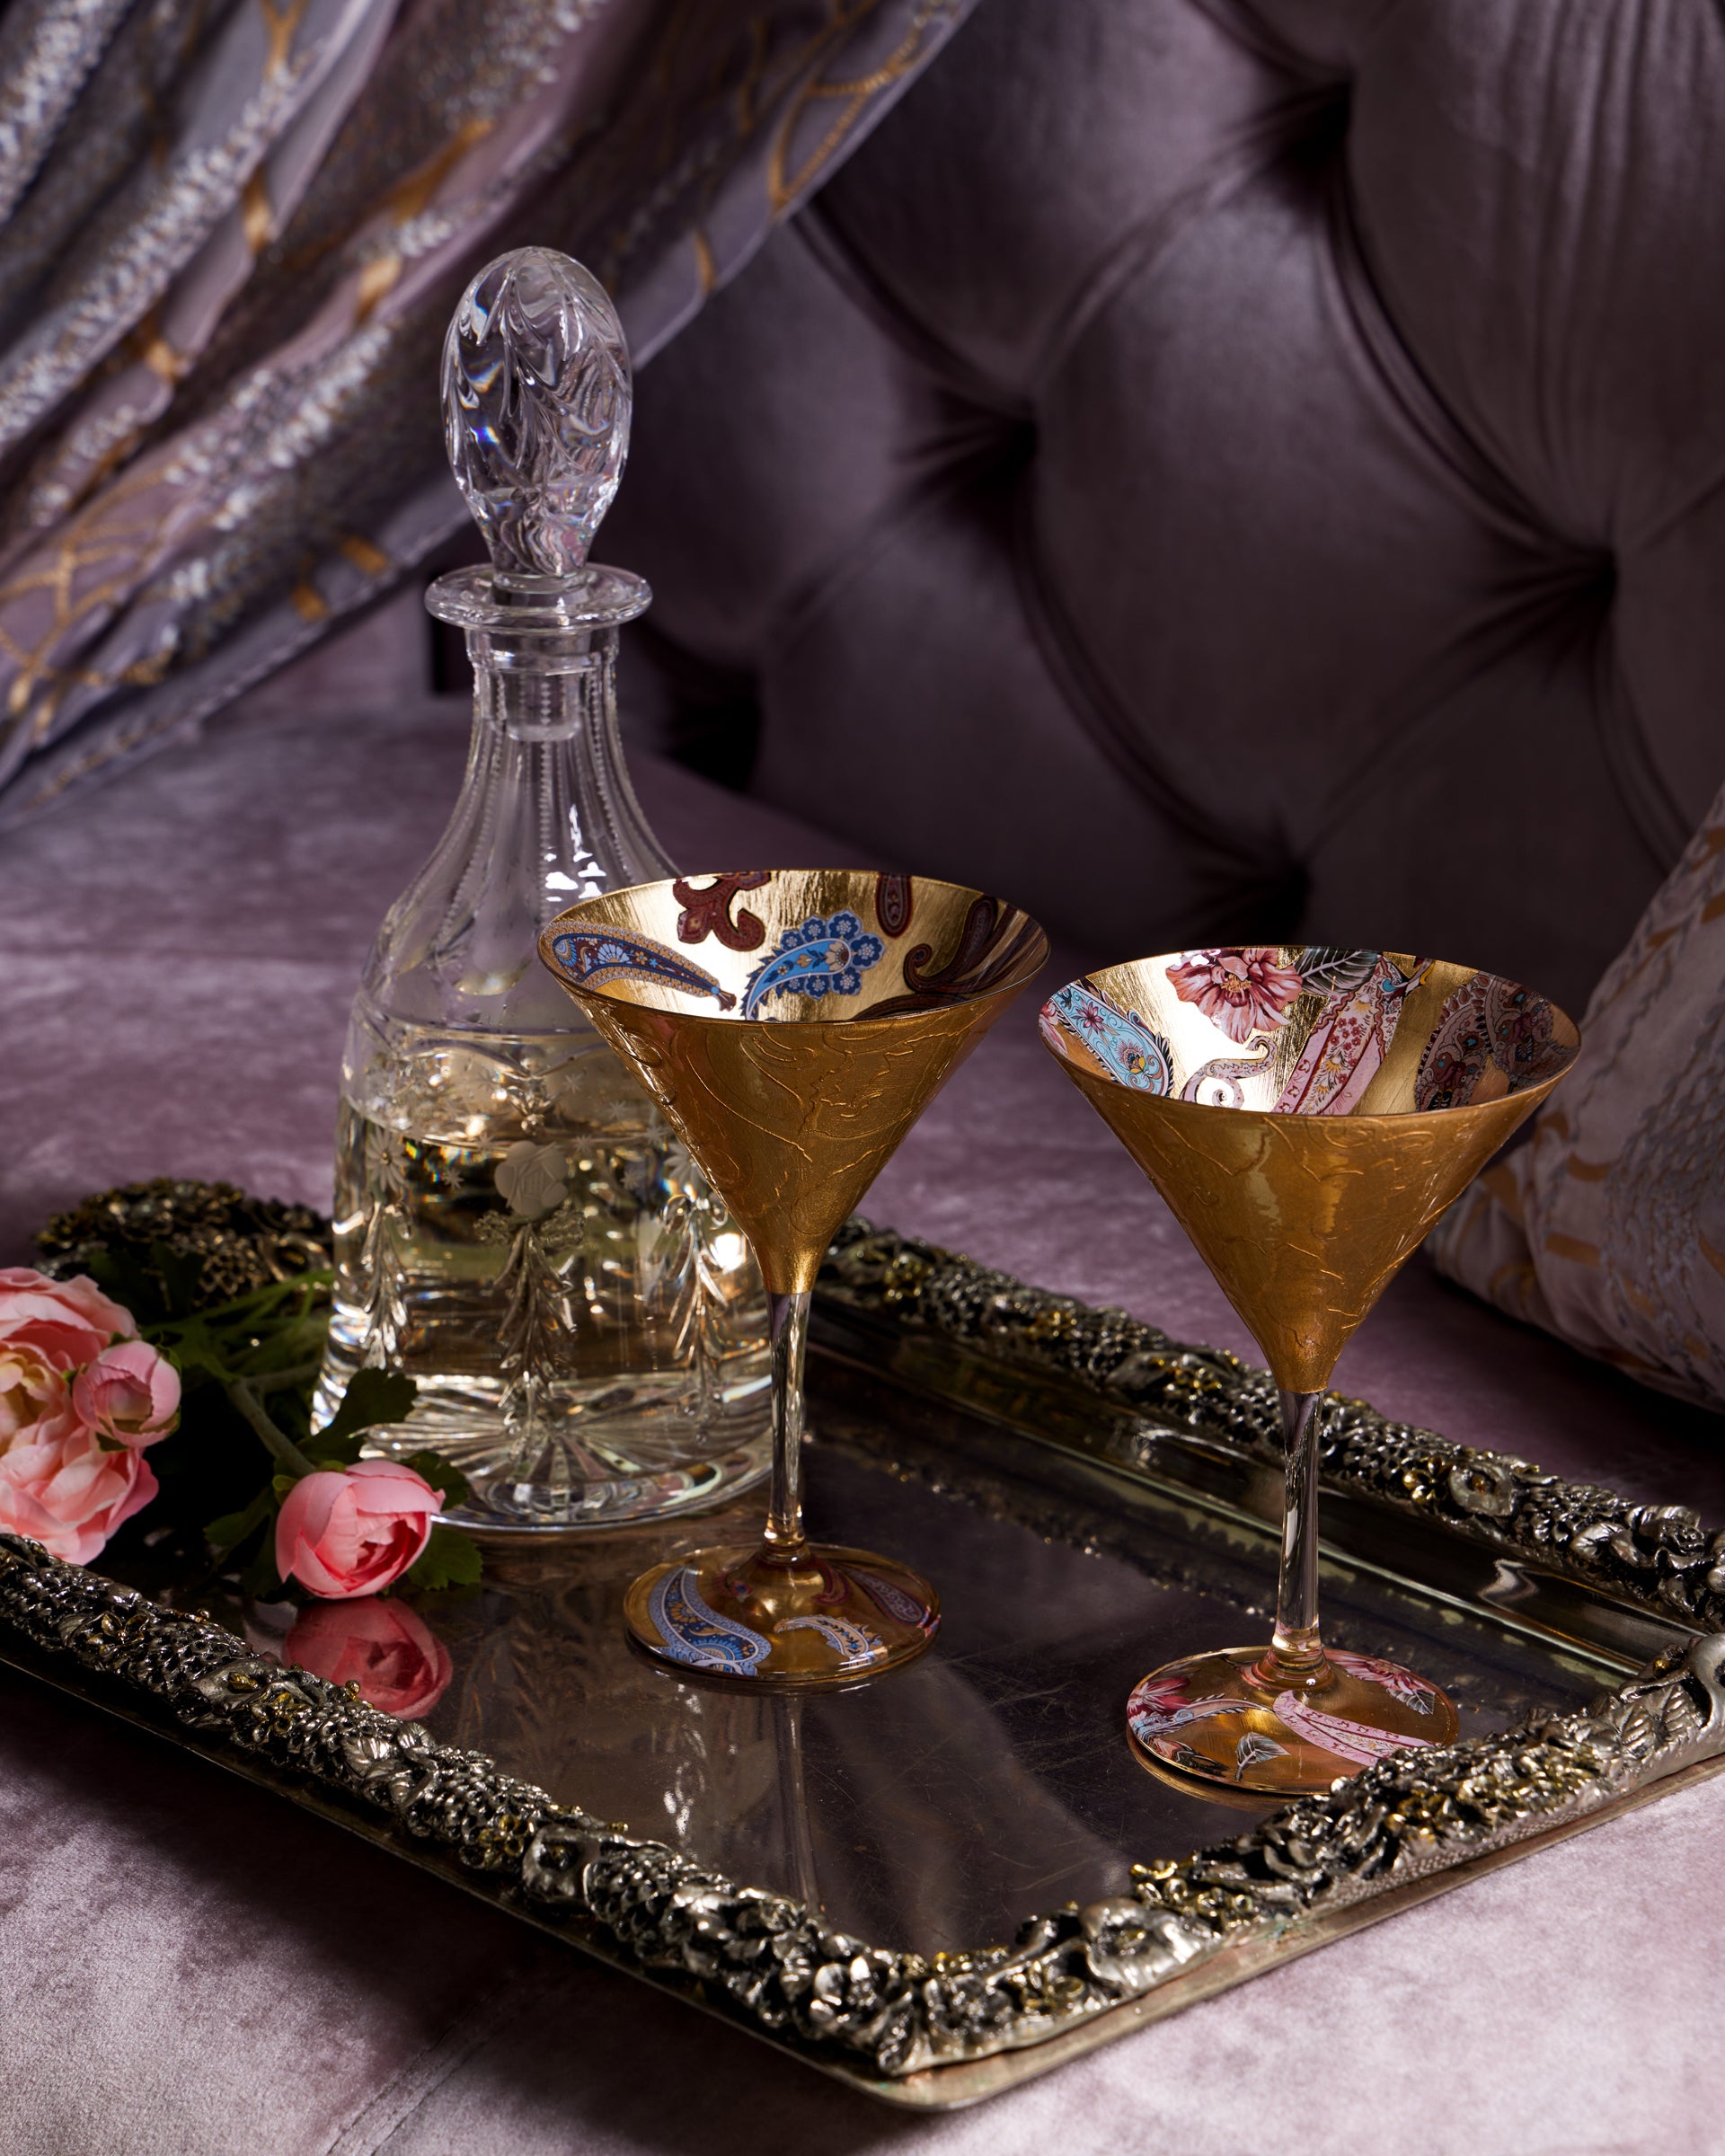 https://cdn.shopify.com/s/files/1/0064/1822/products/janes-vanity-in-the-style-of-jane-scott-potter-gilded-martini-glasses-pink-and-blue-paisley.jpg?v=1657831912